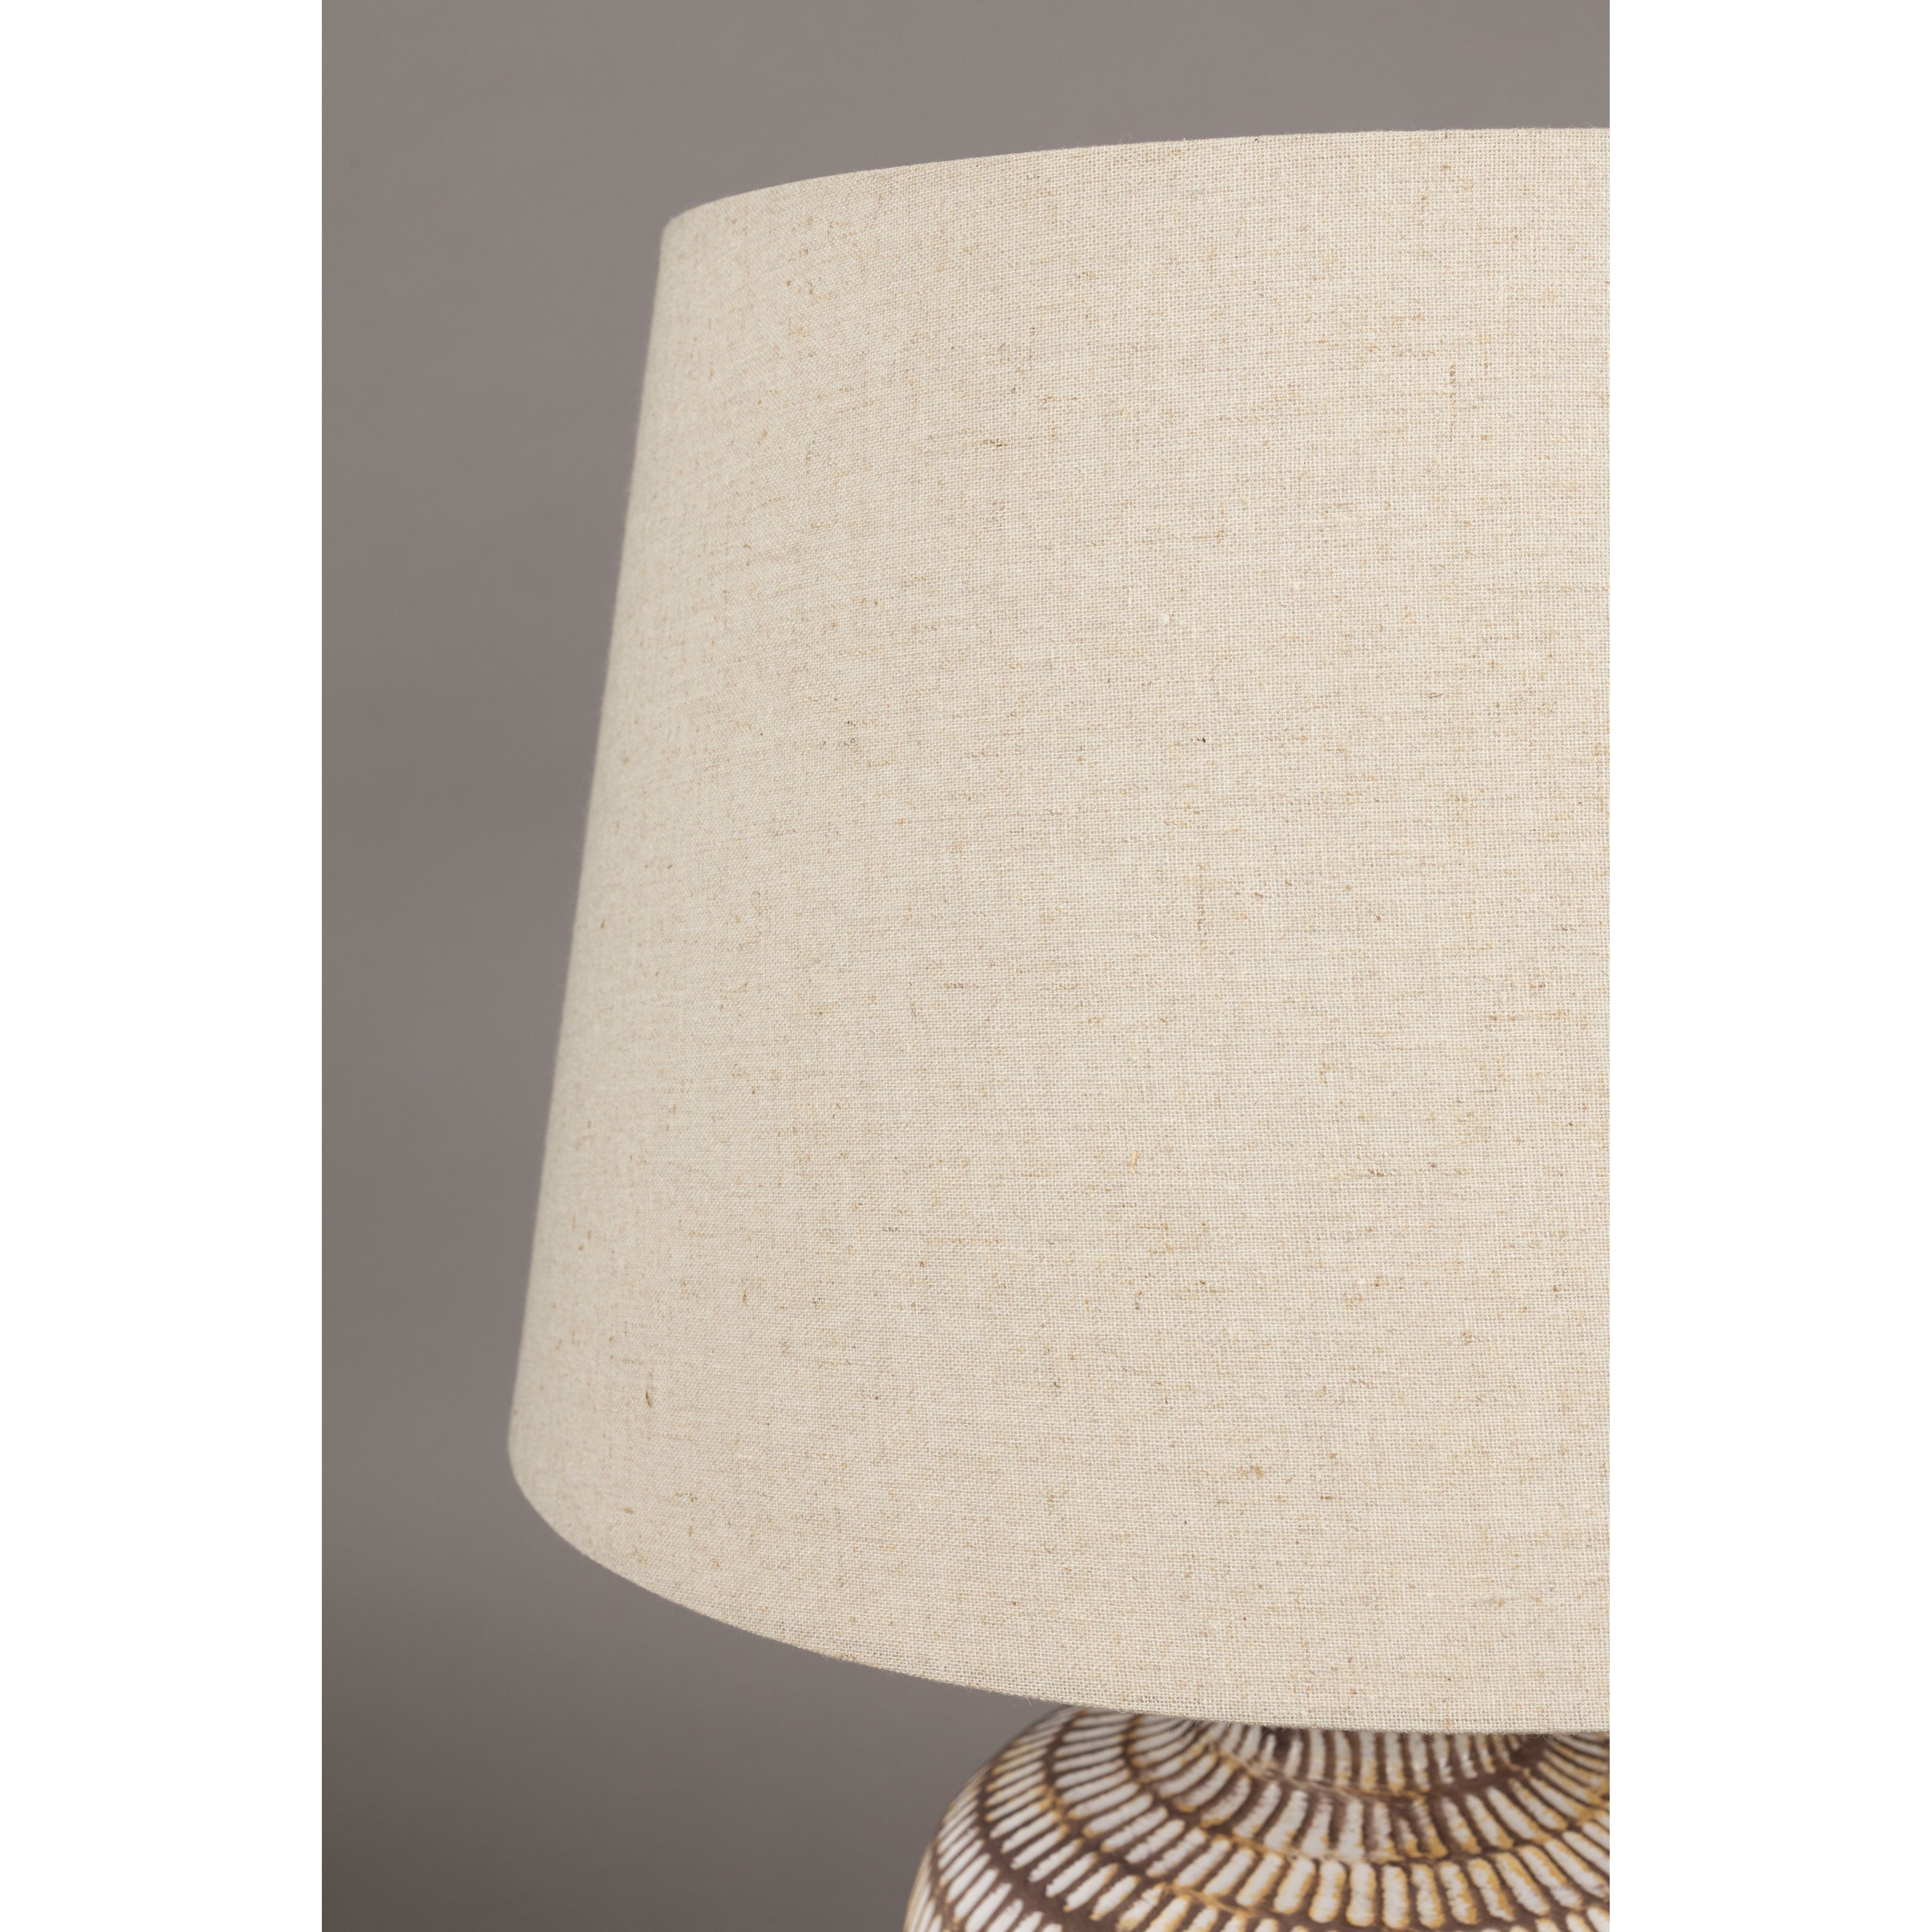 Table lamp russel